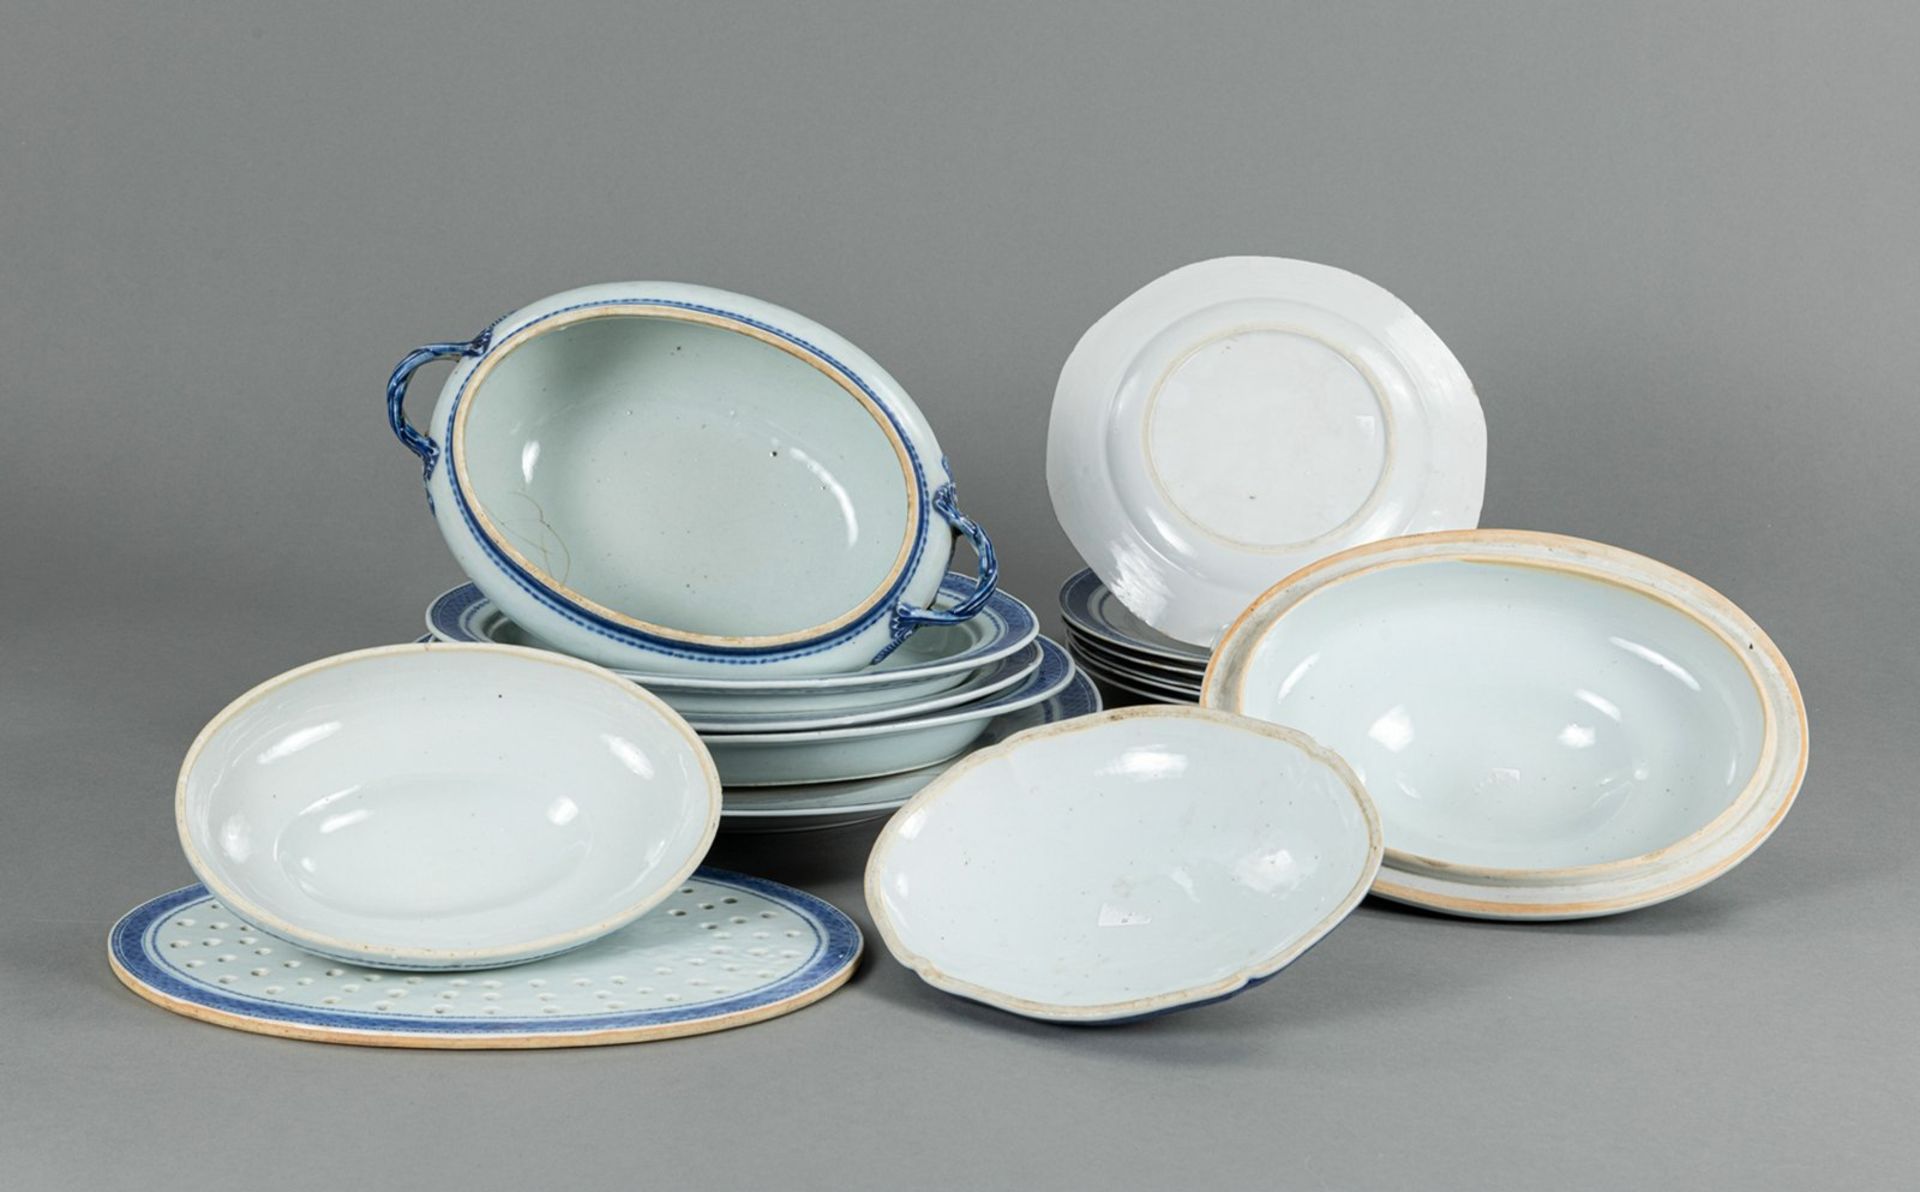 A 19-PIECE DINNERWARE SET WITH A TUREEN, TWO COVERS, WARMING PLATES AND DISHES - Image 2 of 8